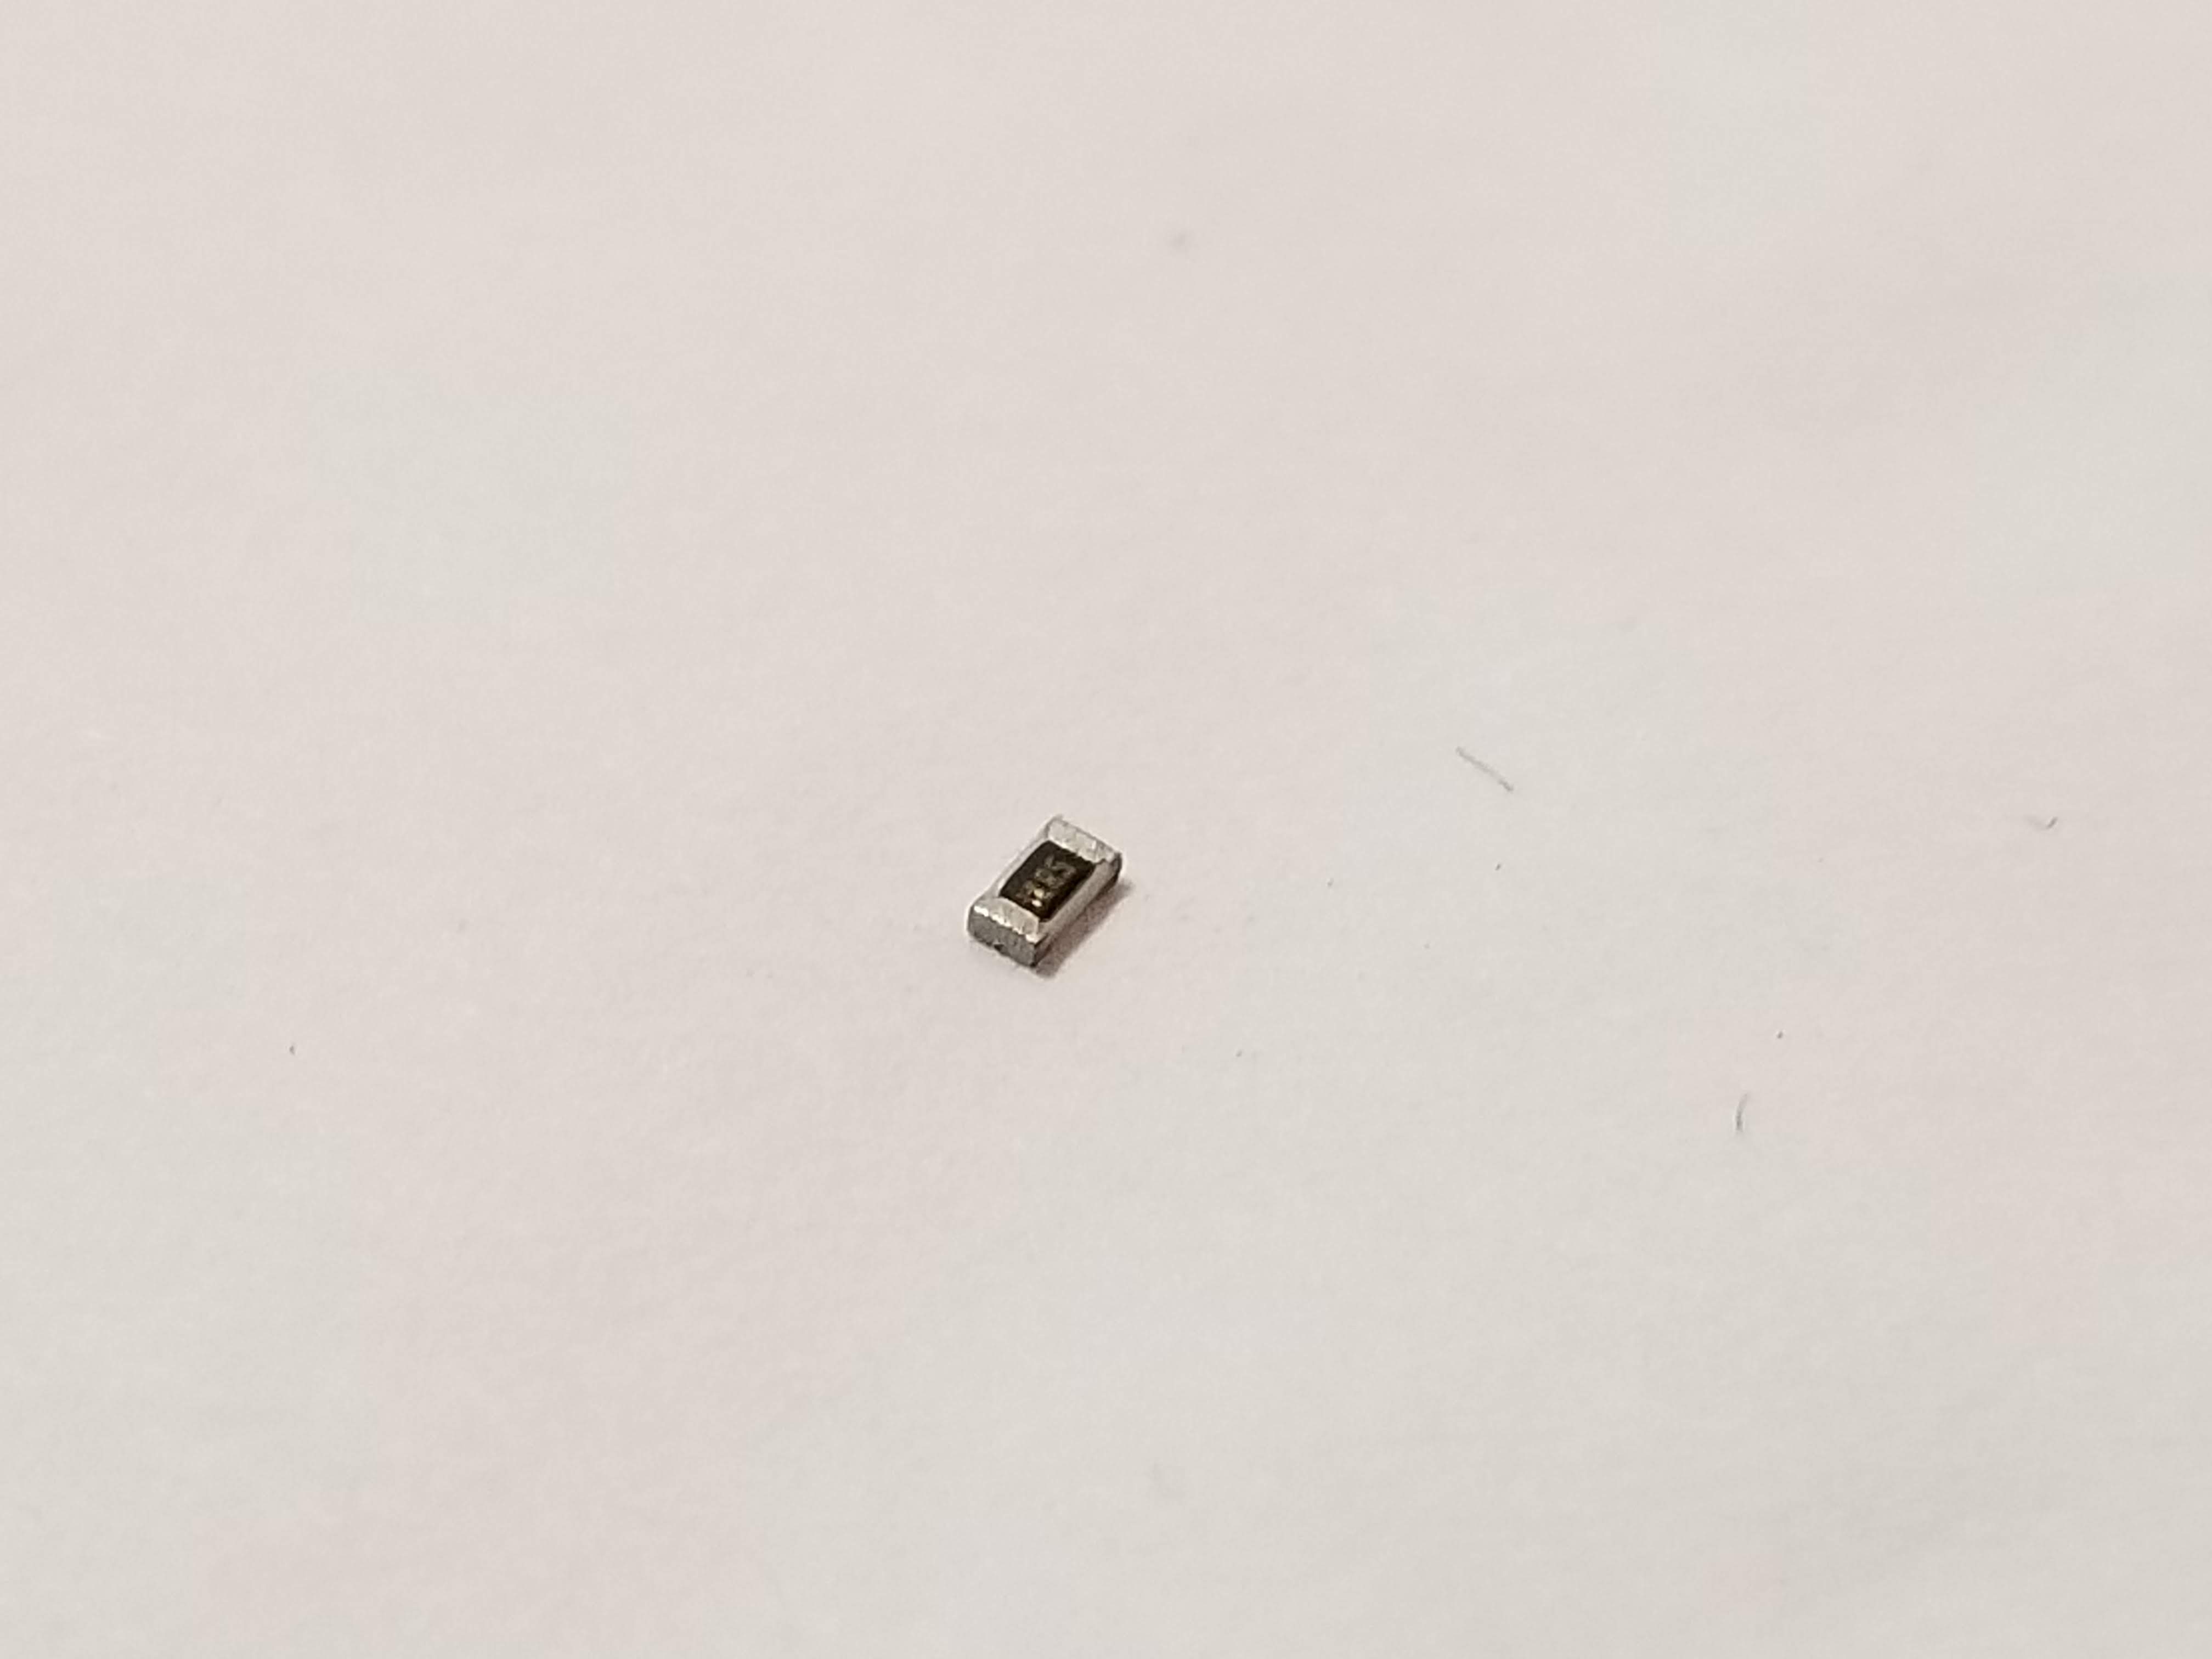 RES SMD 196K OHM 0.5% 1/10W 0603 Pack of 300 RT0603DRE07196KL 